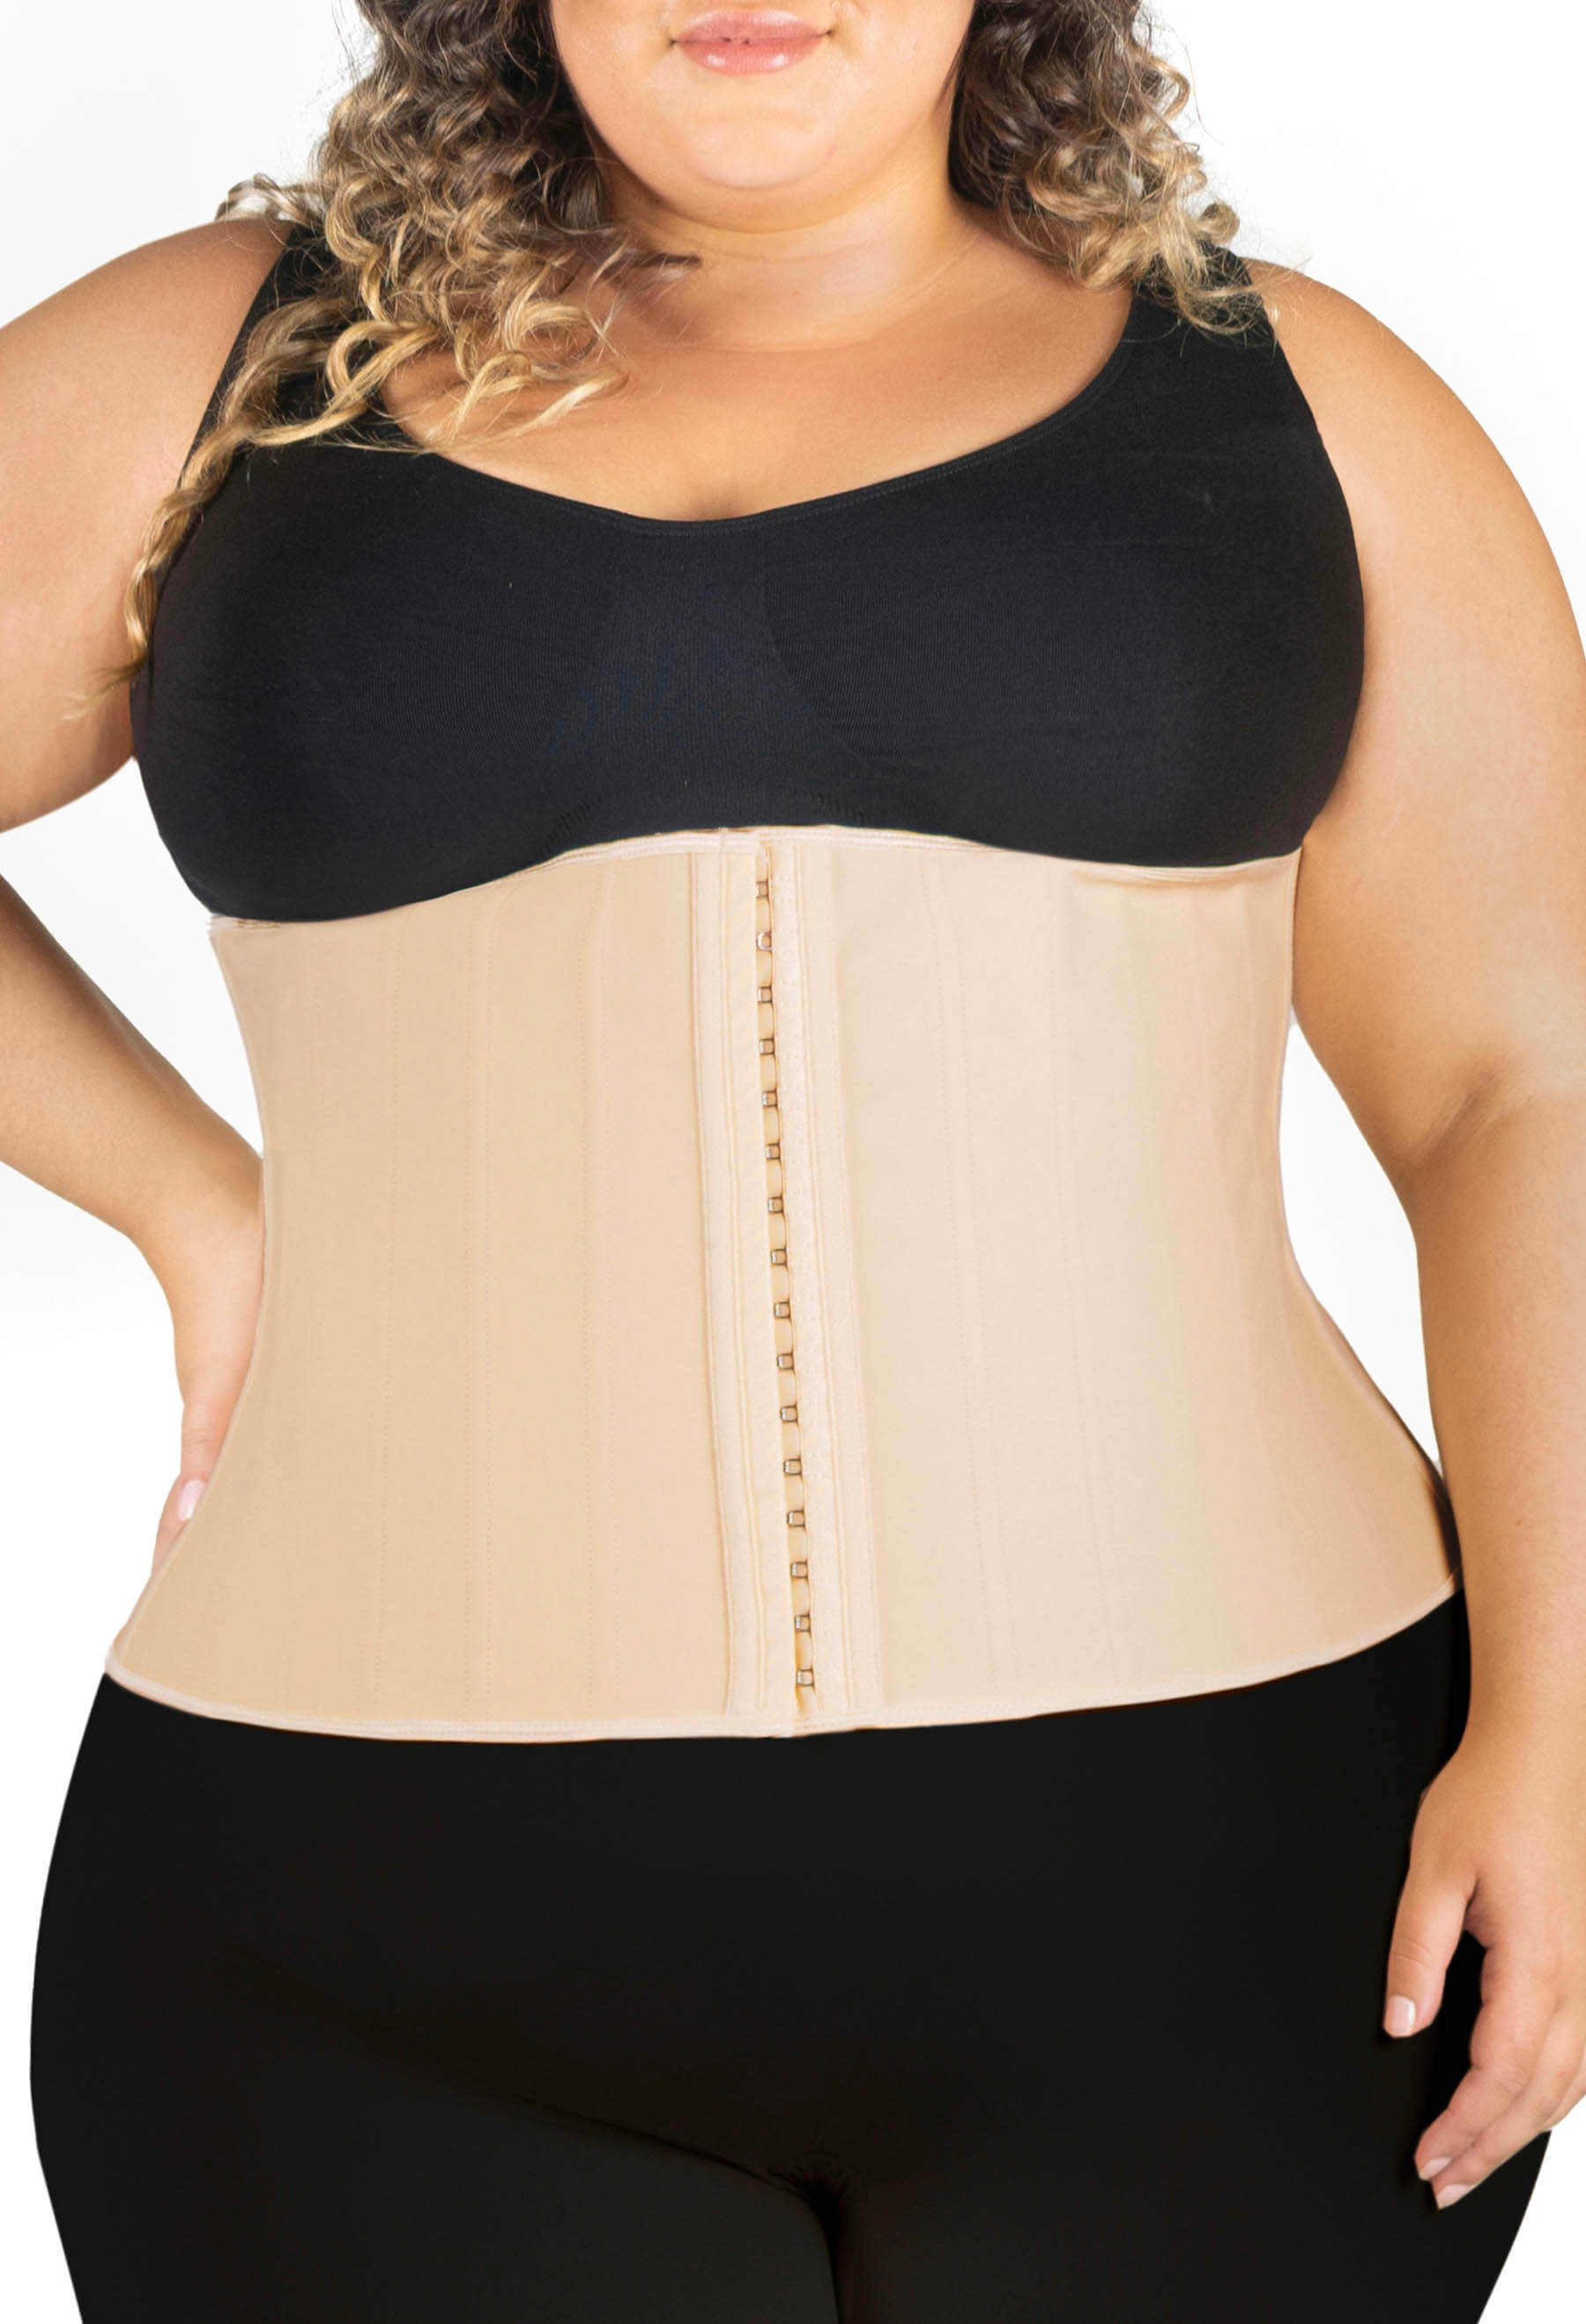 Newbie wants to wear corsets instead of bras for bust support. Looking for  suggestions : r/corsetry